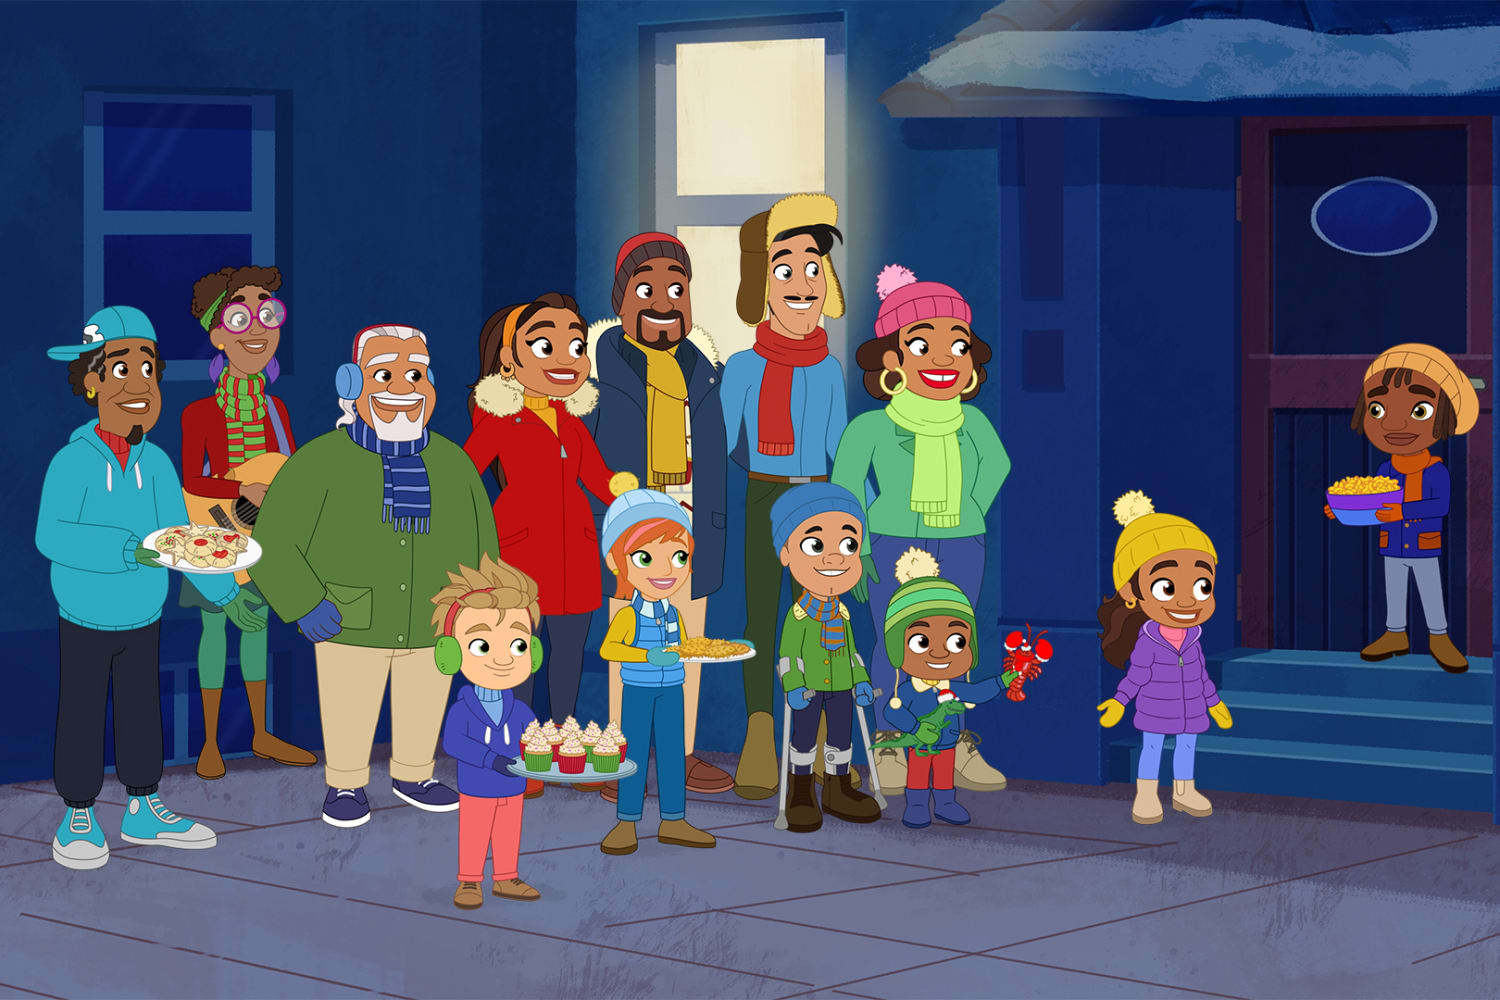 Animated and authentic: A Puerto Rican girl’s Christmas is focus of new PBS show